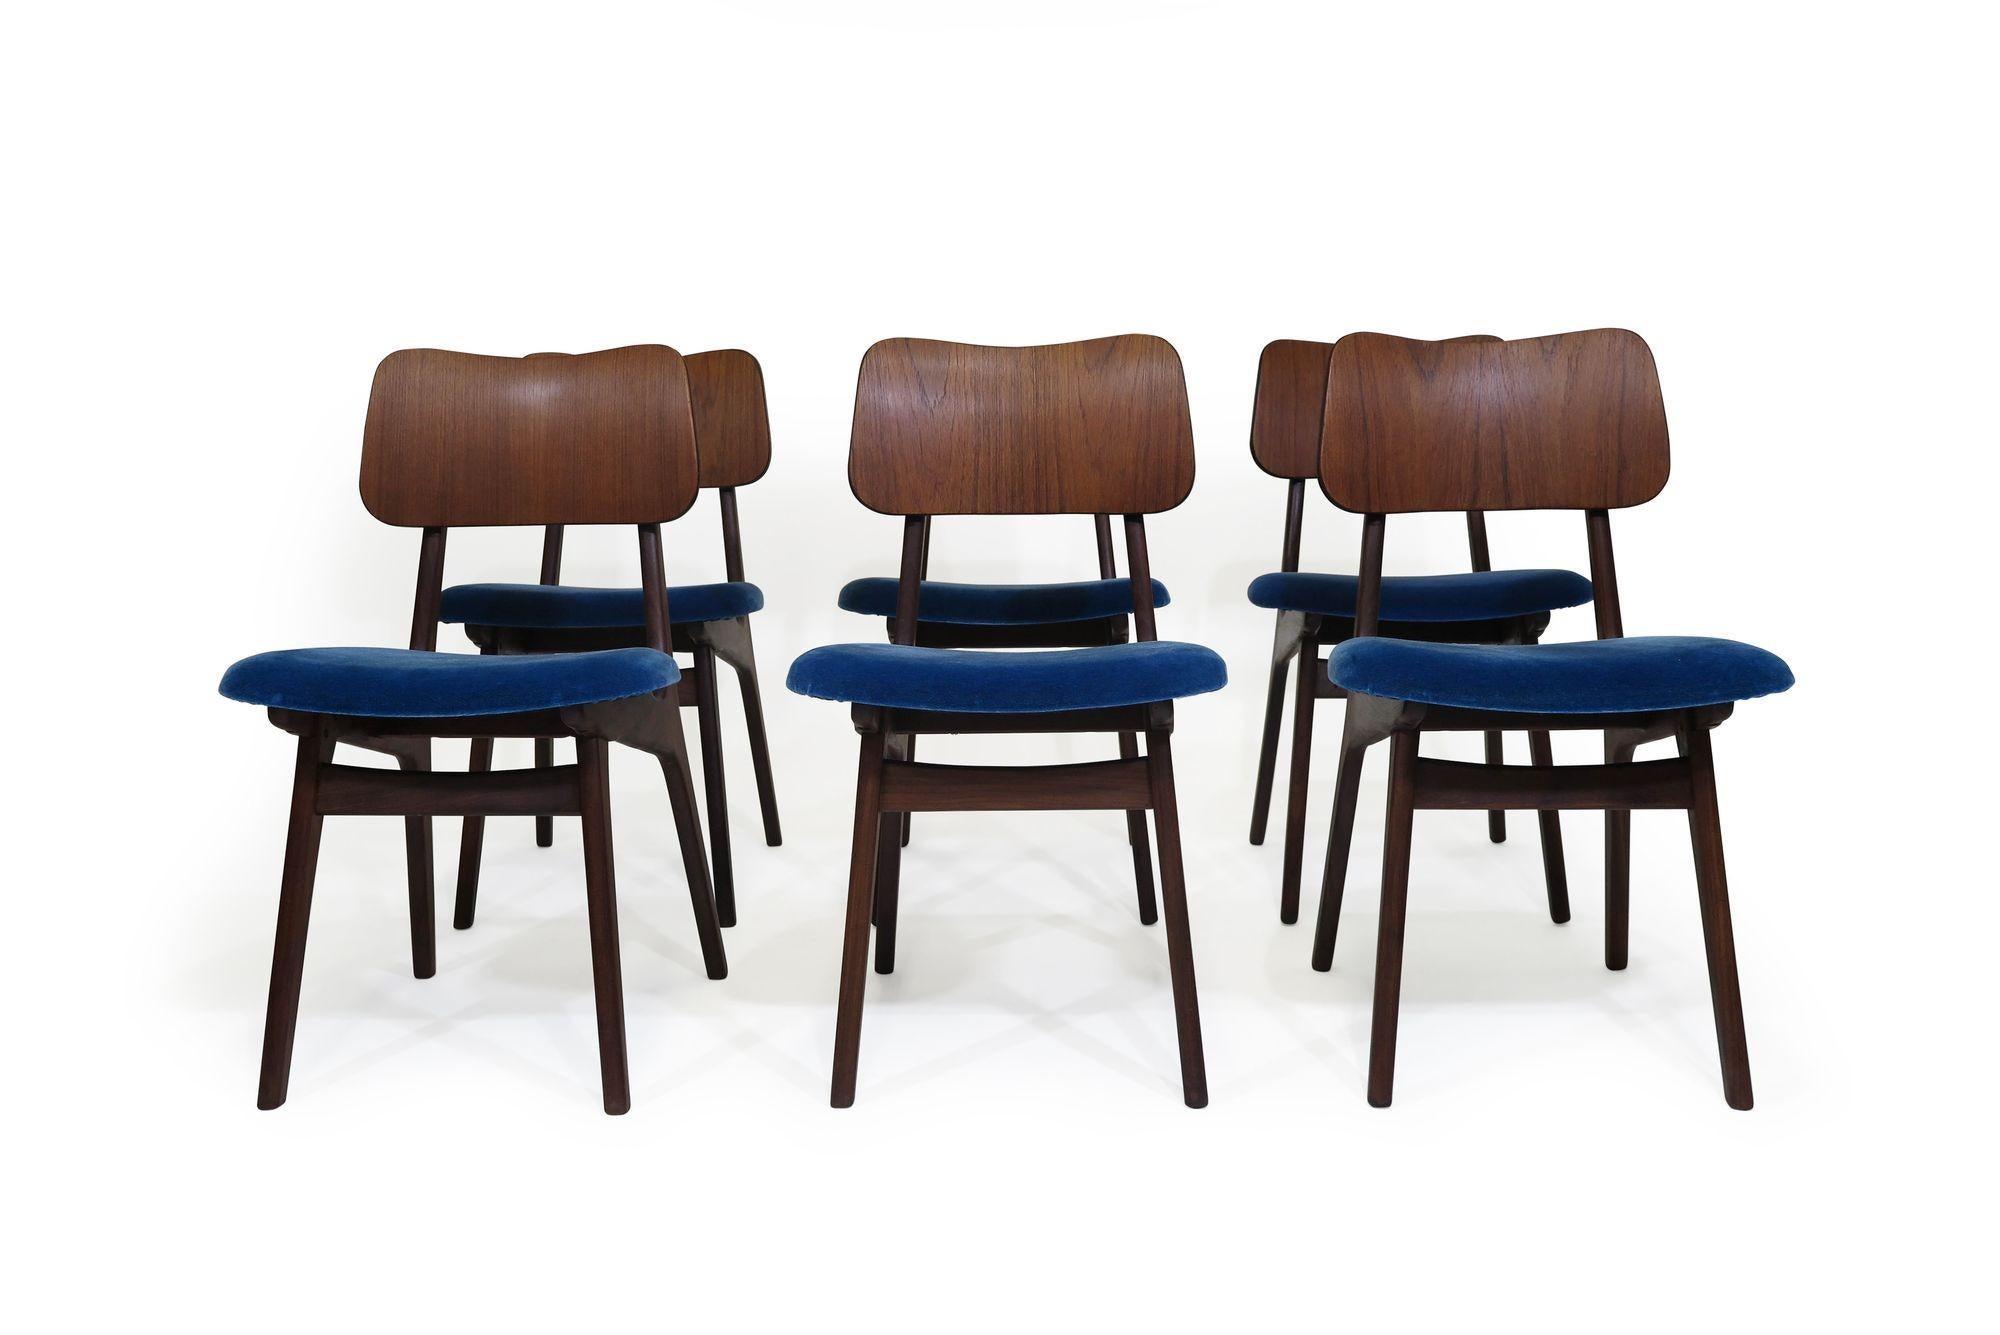 20th Century Six Arne Hovmand-Olsen Walnut and Teak Dining Chairs, 30 Available For Sale